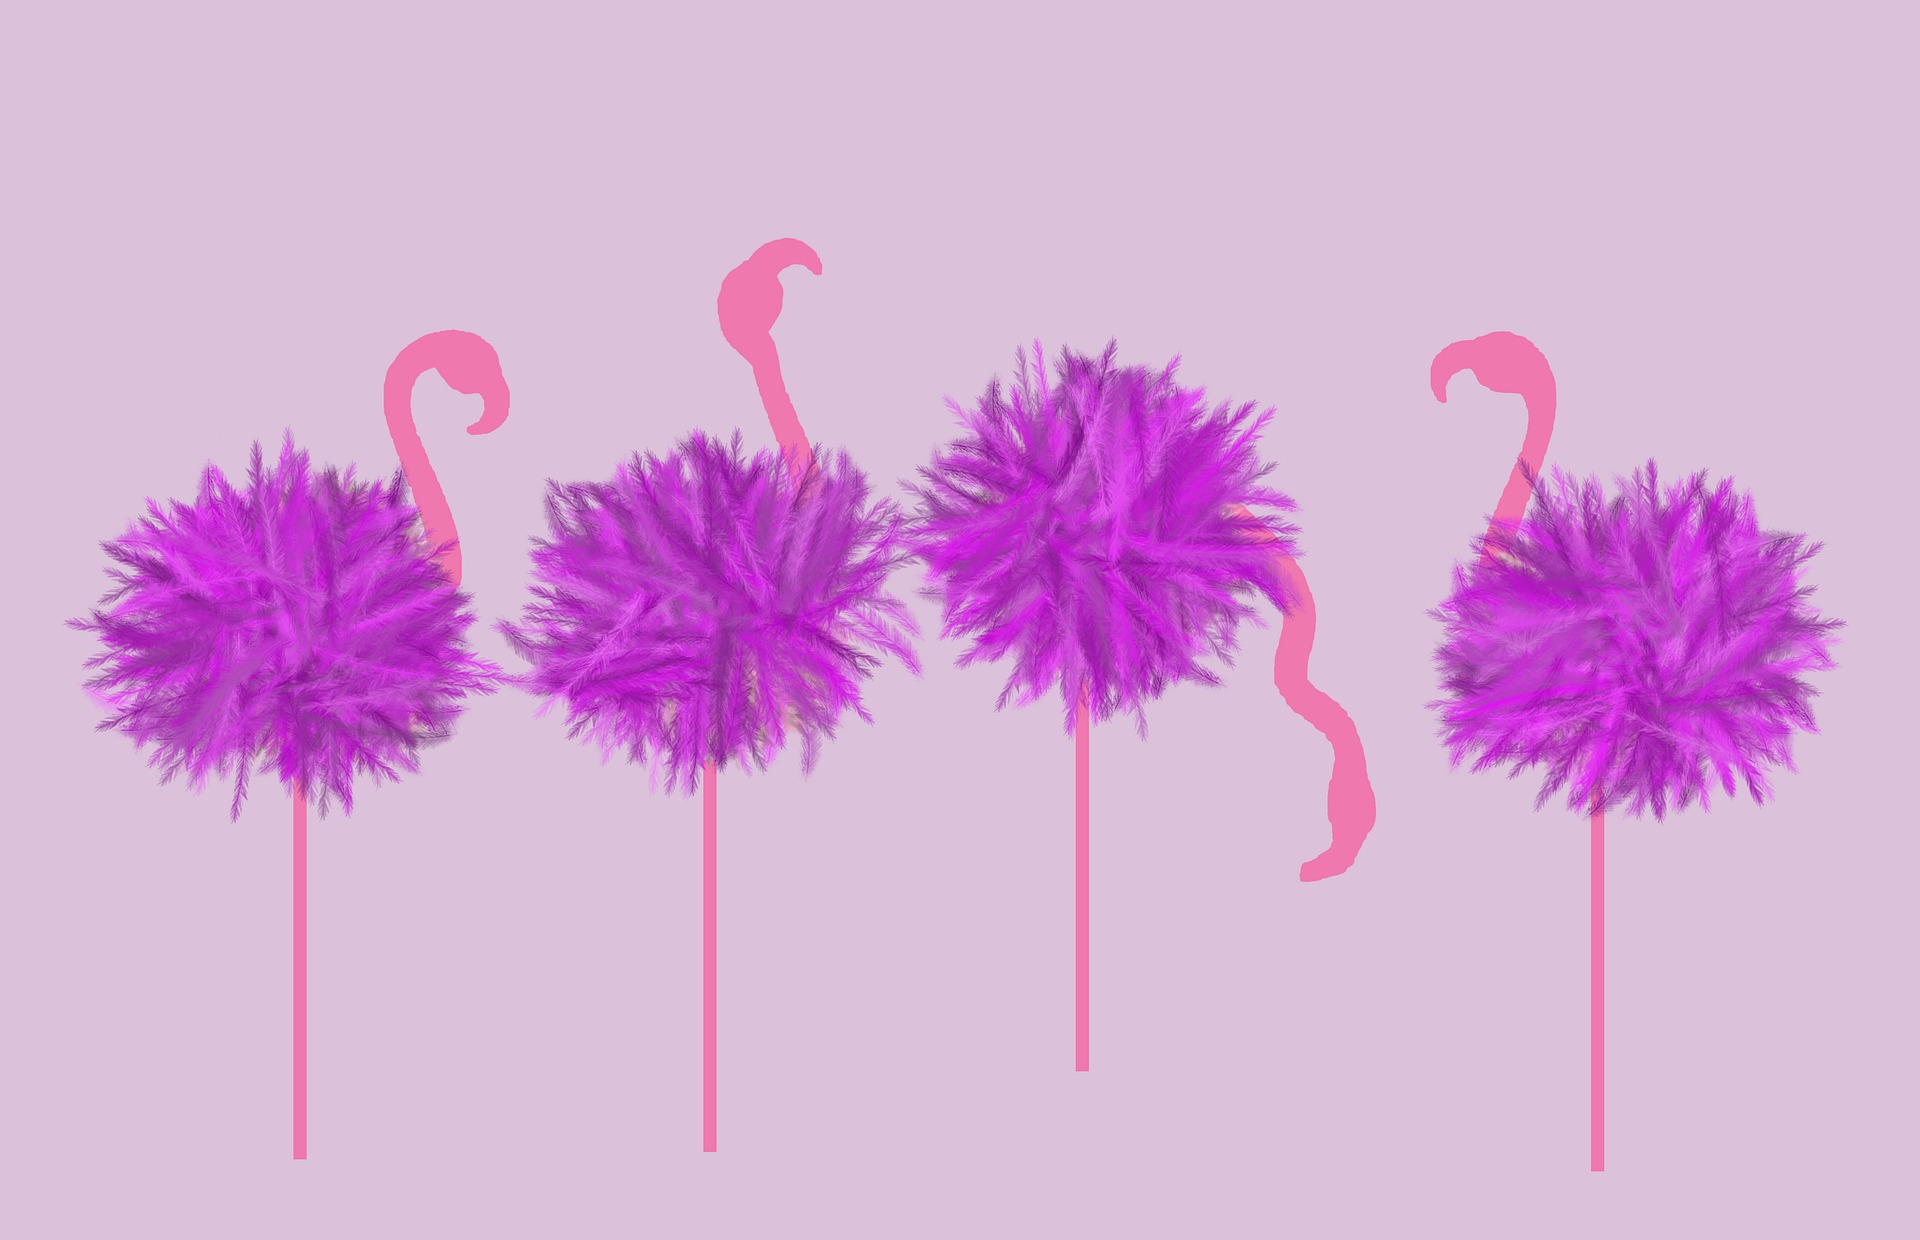 Four drawn flamingos on a pink background